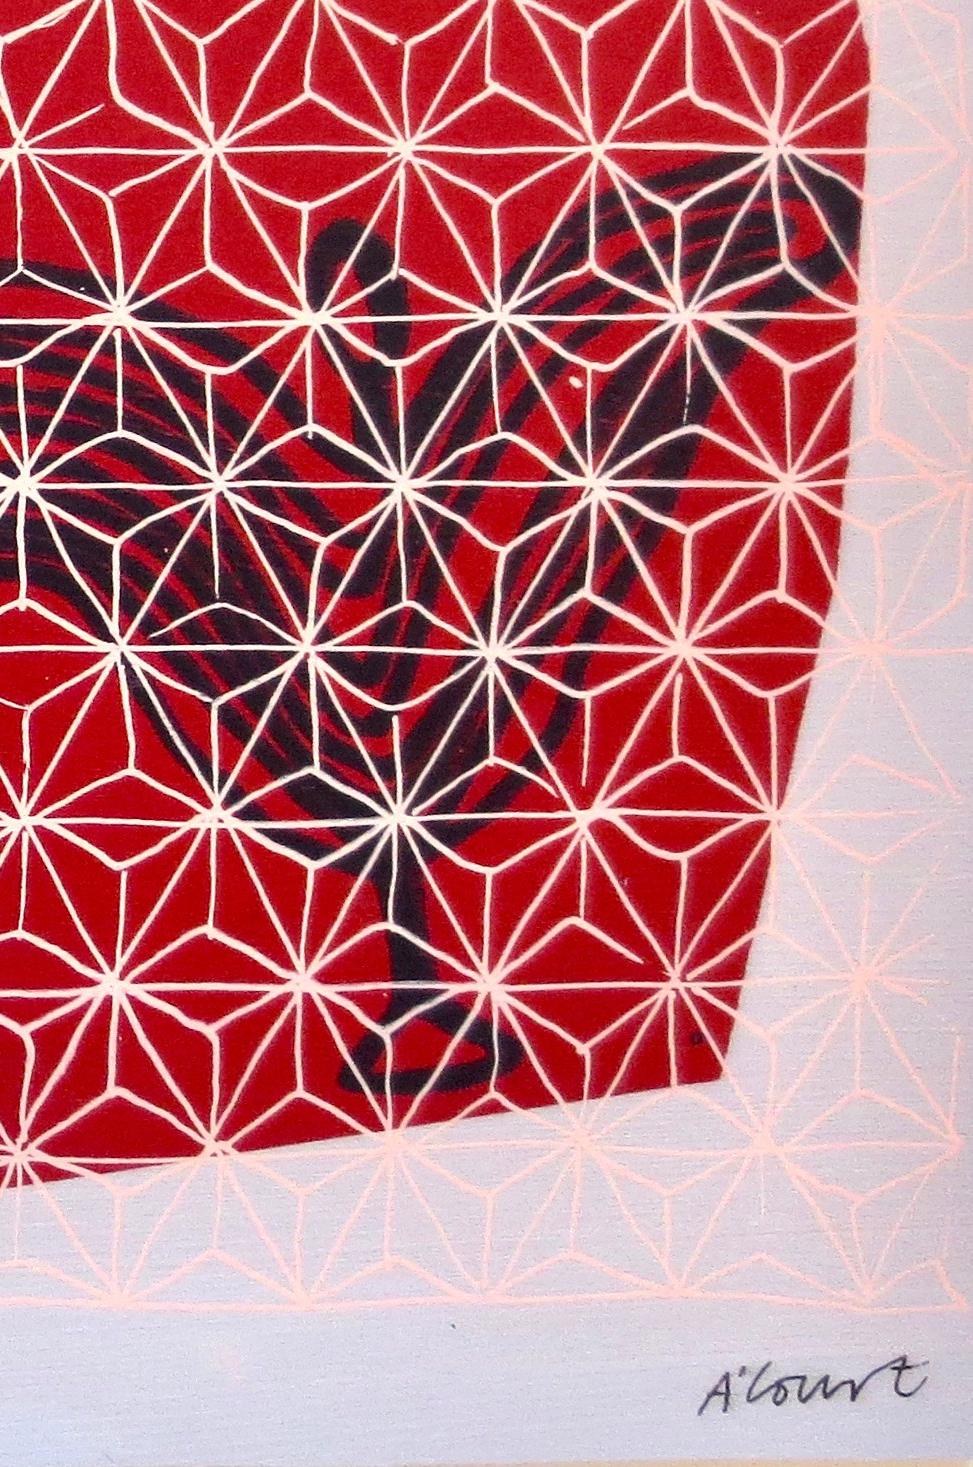 Angel Songs, bright red geometric pattern, work on paper - Contemporary Mixed Media Art by Angela A'Court